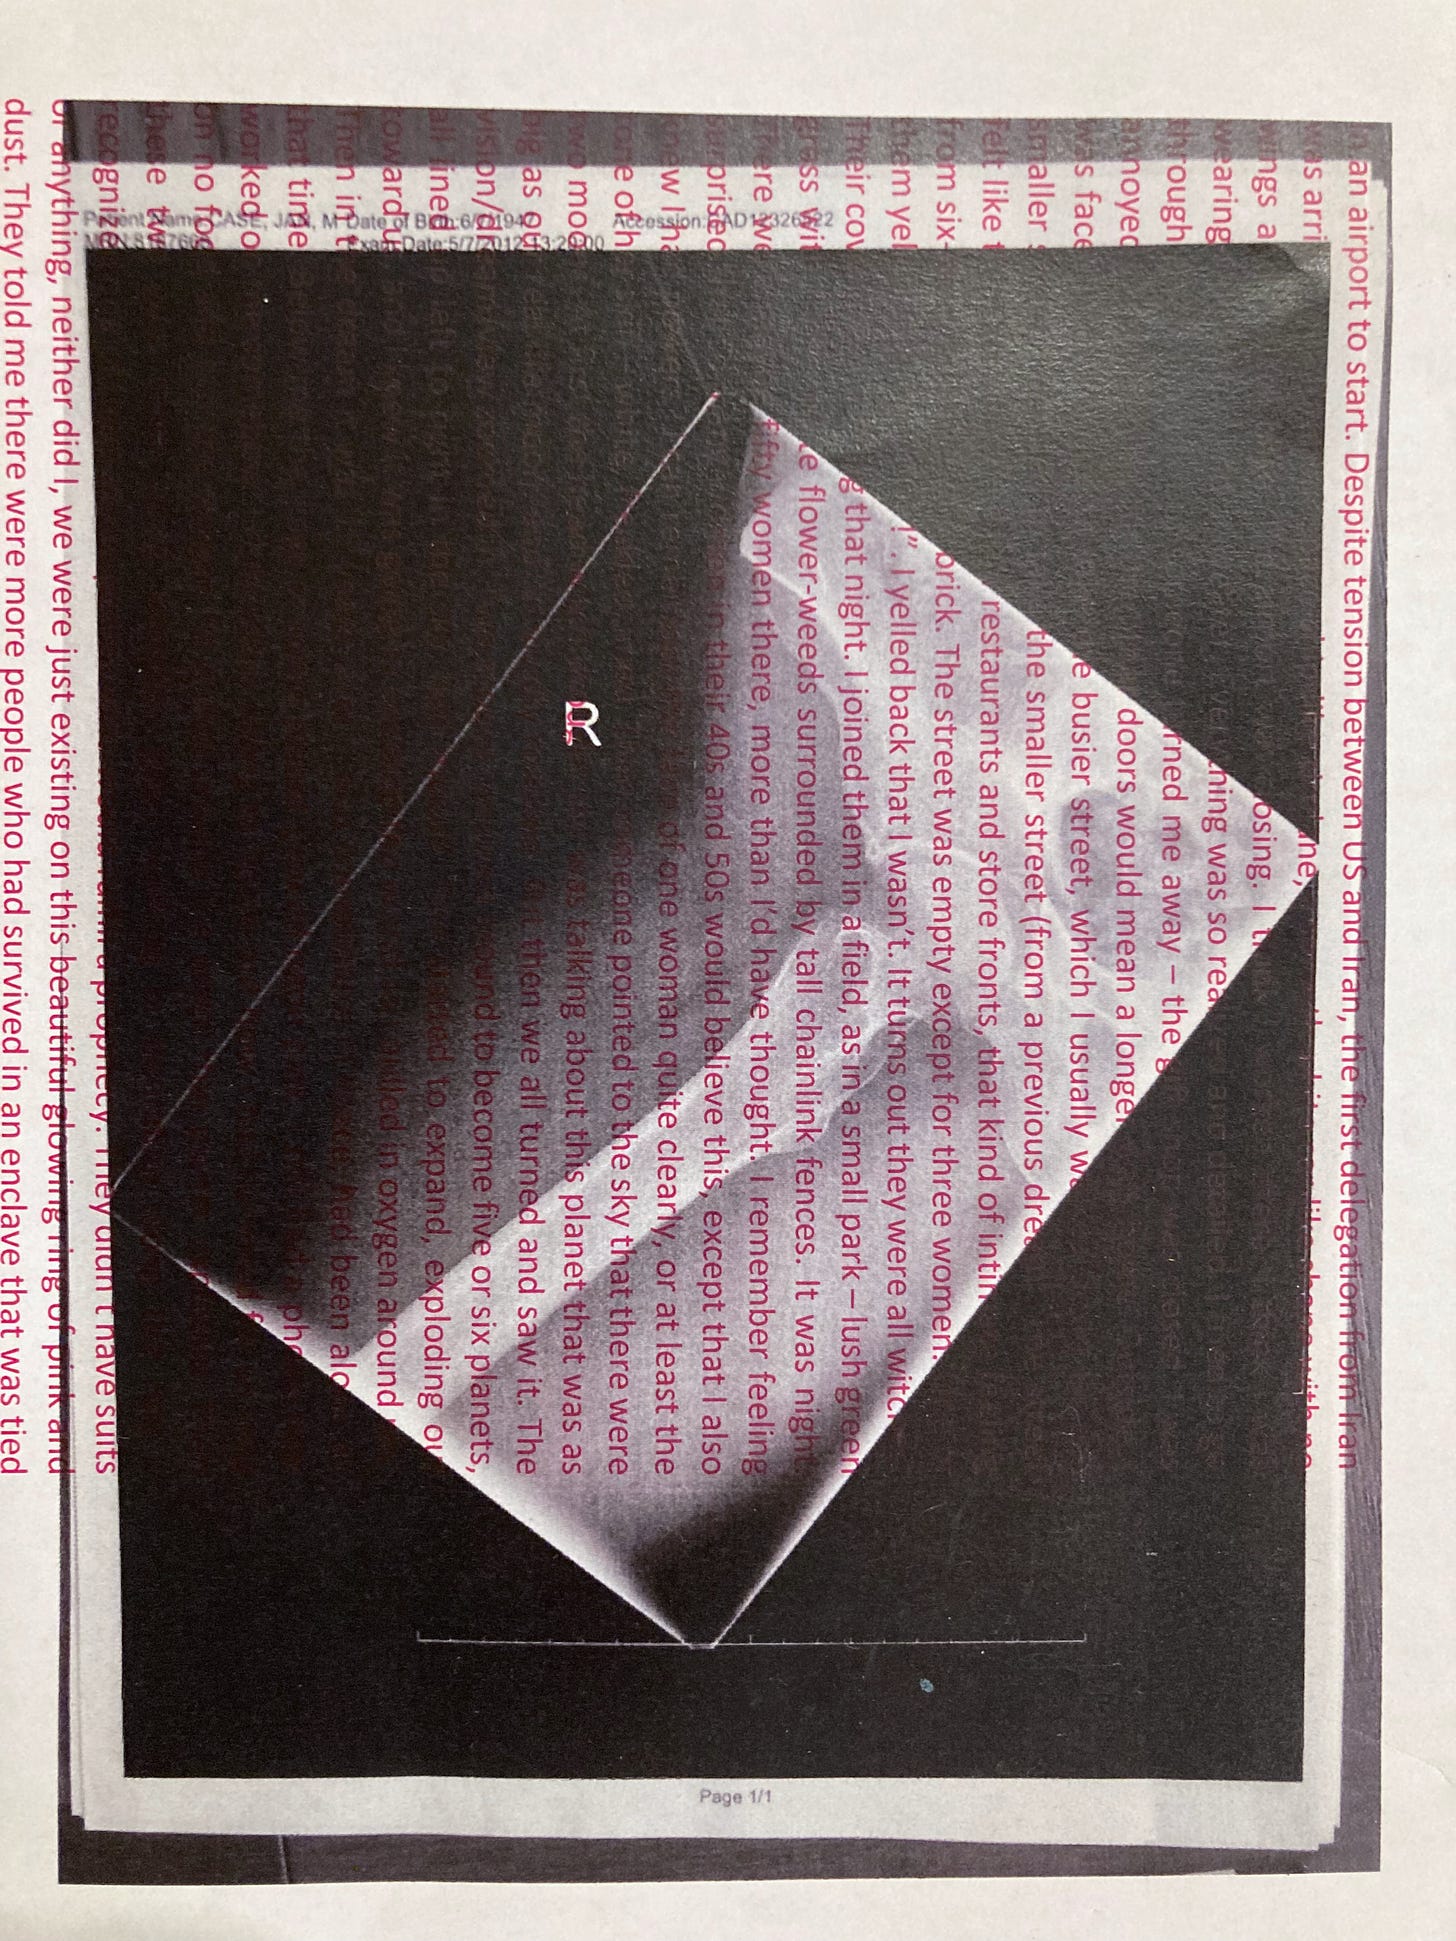 An xray surrounded by a black border is overlaid by neon pink text that is barely legible describing a dream in which the world explodes but the dreamer finds themselves on a pink glowing dust ring.